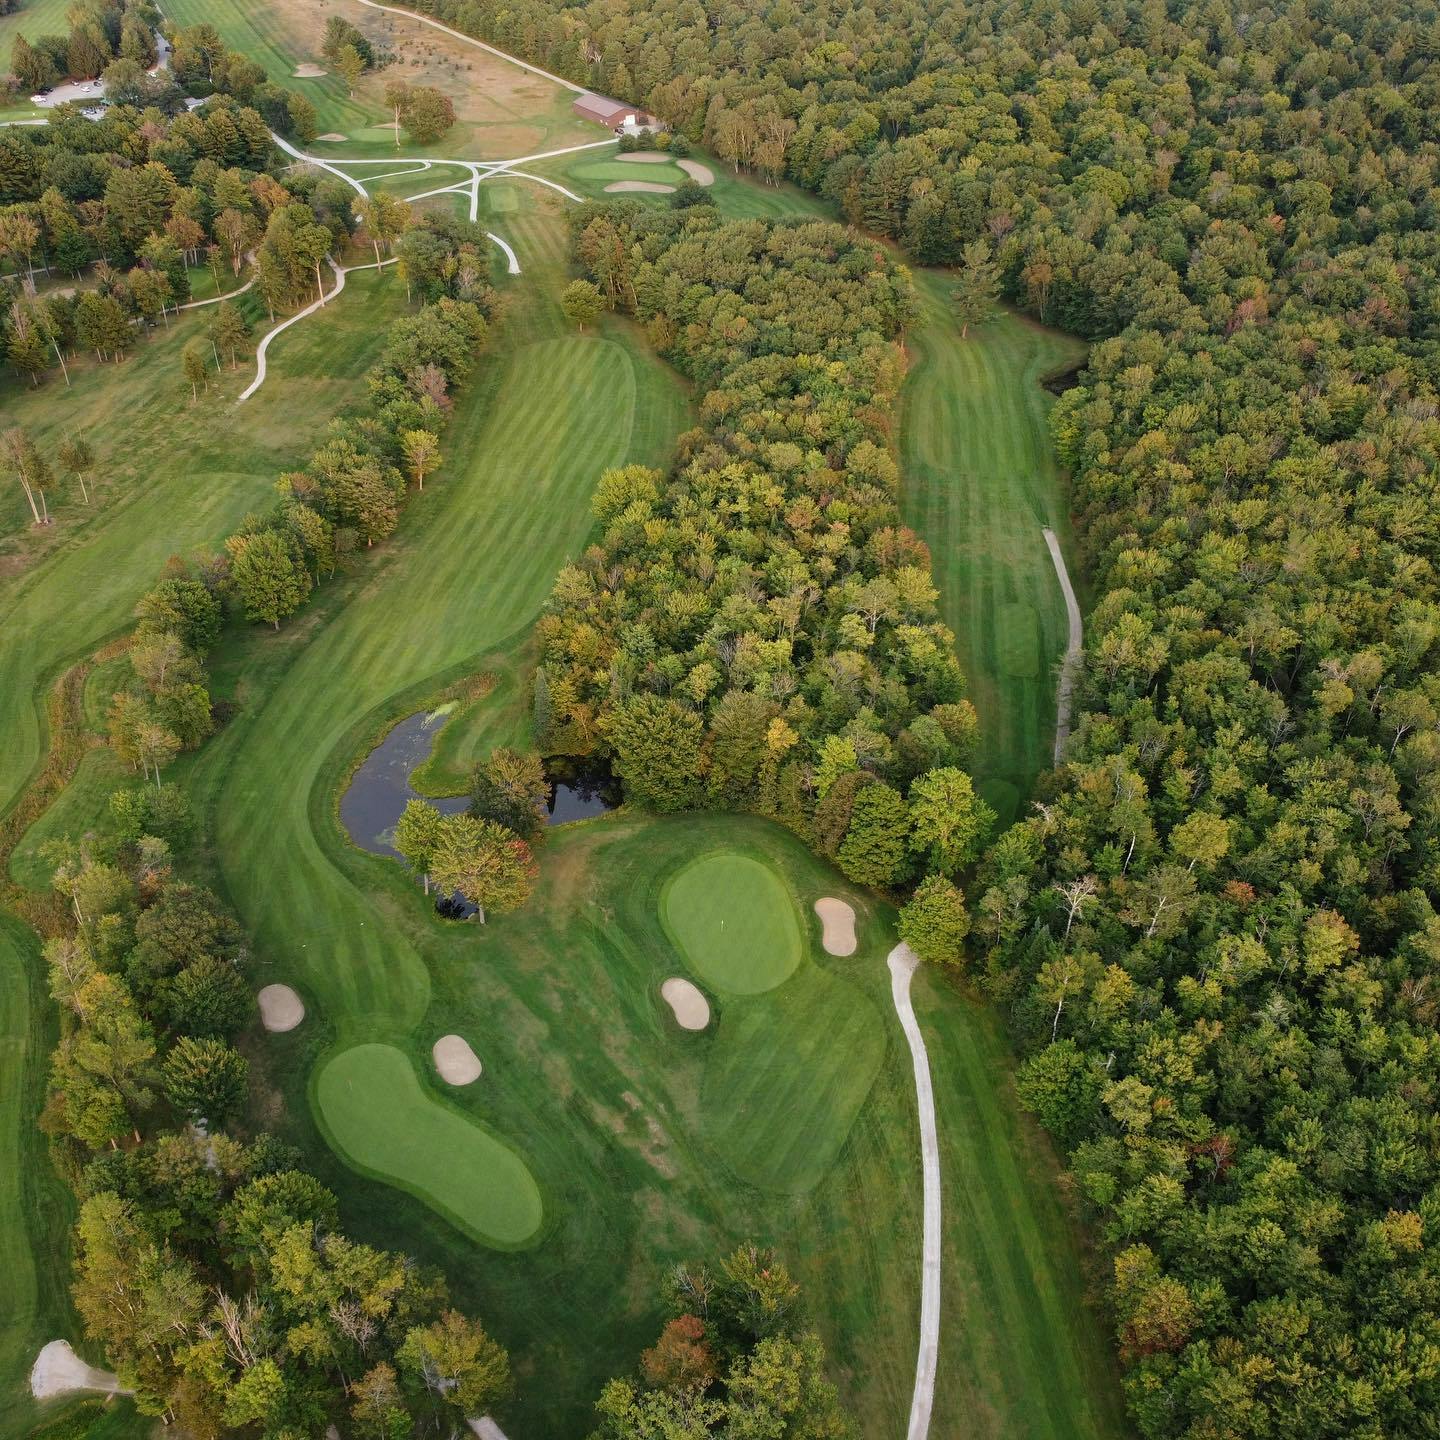 Happy @rbccanadianopen week 🇨🇦

The back nine at this years host @oakdalegolfandcountryclub was designed by Robbie Robinson. 

Robinson designed the south course here, as well as 2 and 5 north. The new holes on the north opened in 1968, and the south course opened in 1972. 

Robinson was inducted into the Canadian Golf Hall of Fame in 2002:

“Clinton E. Robinson, better known as Robbie, loved the game of golf and spent his life bringing it to the masses.  A golf course architect who apprenticed under the legendary Stanley Thompson, Robinson designed or remodelled more than 100 courses.  Perhaps his single most significant contribution to the game was in the study of turfgrass and the dissemination of this information through the establishment of the Canadian Turfgrass shows and as the Green Section director for the RCGA in the 1950’s.” 

#LSGHistory #PlayTheLake #GolfArchitecture